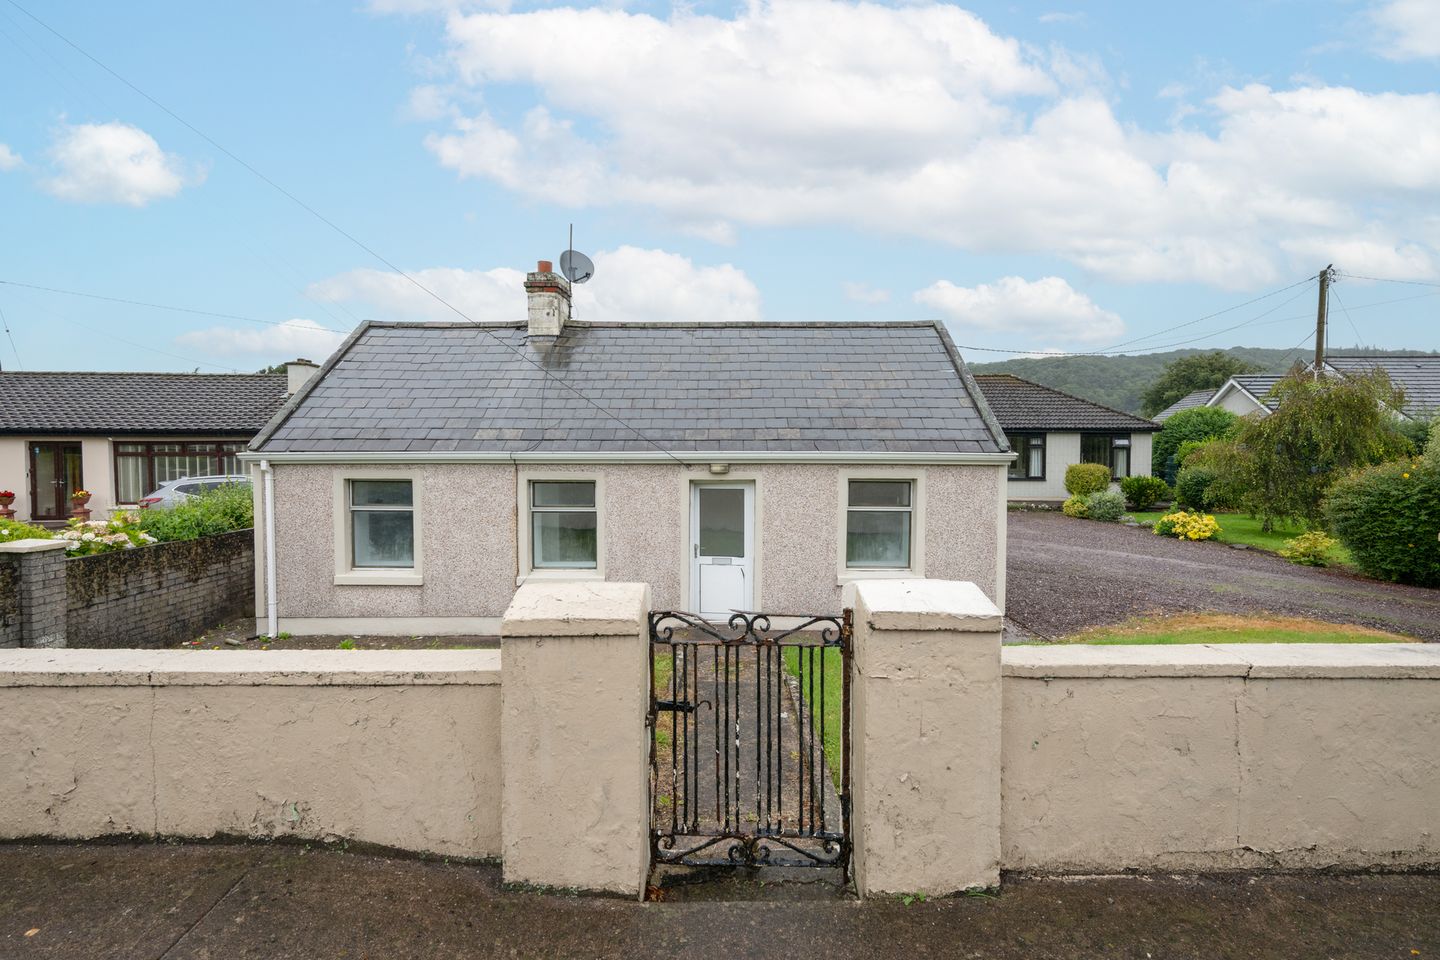 Rose Cottage, Carrigrohane Road, Carrigrohane, Co. Cork, T12W24D